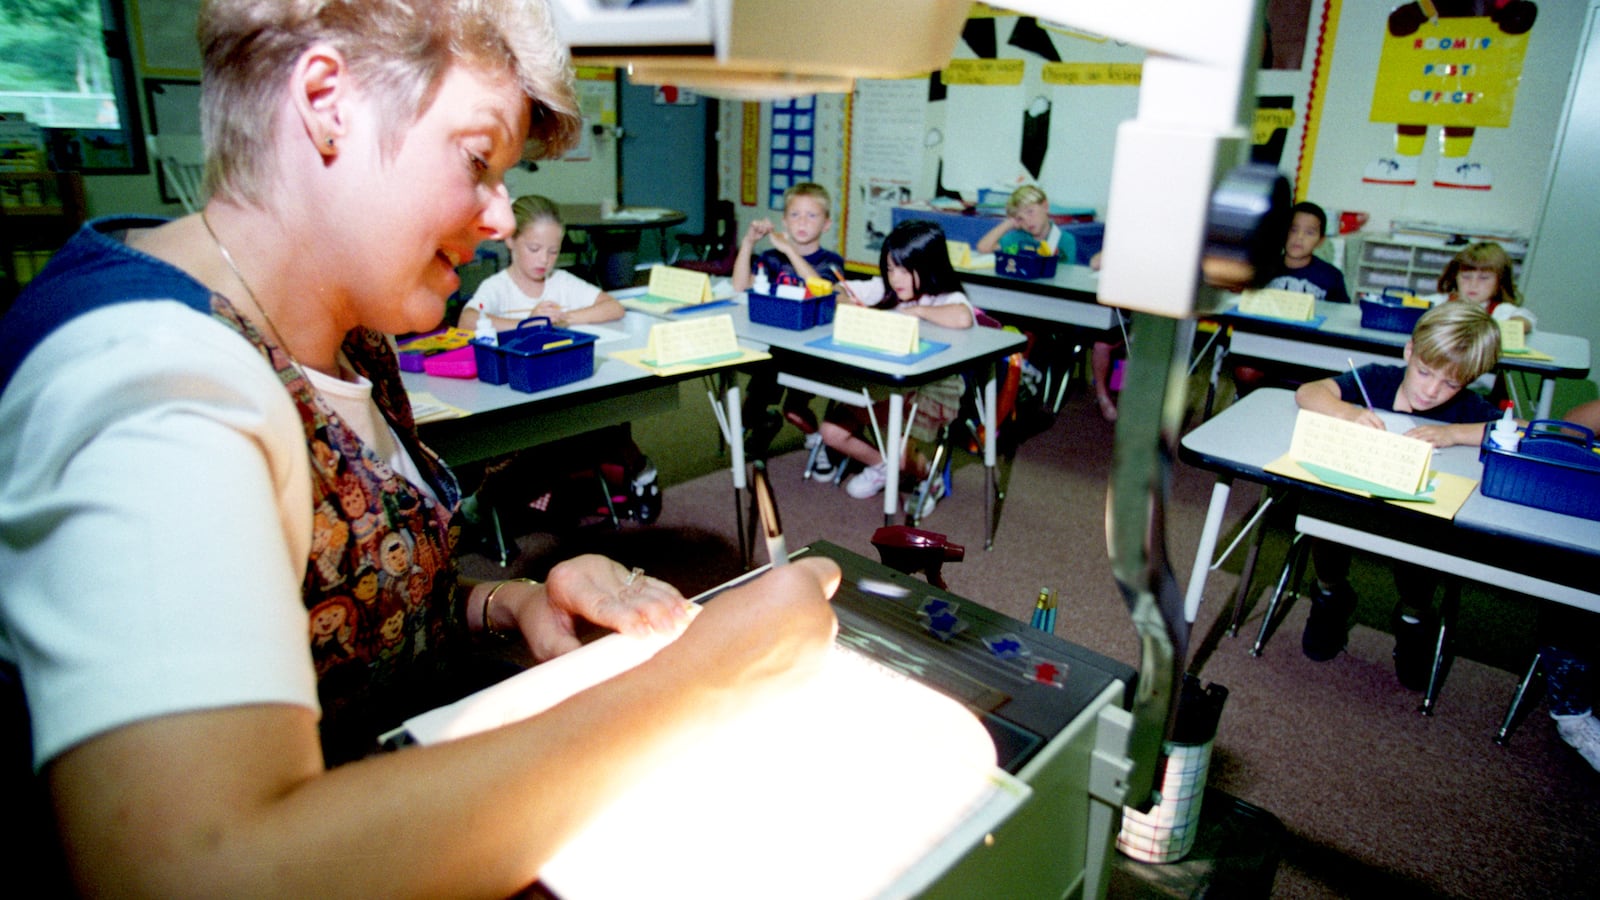 At Foxborough Elementary School, in 1996, 1st grade teacher Linda Kiefer uses a projector to show her students the formation of numbers. The Capistrano Unified School District was one of the first in Orange County, California to implement a class-size reduction plan after a state funding bill was signed.